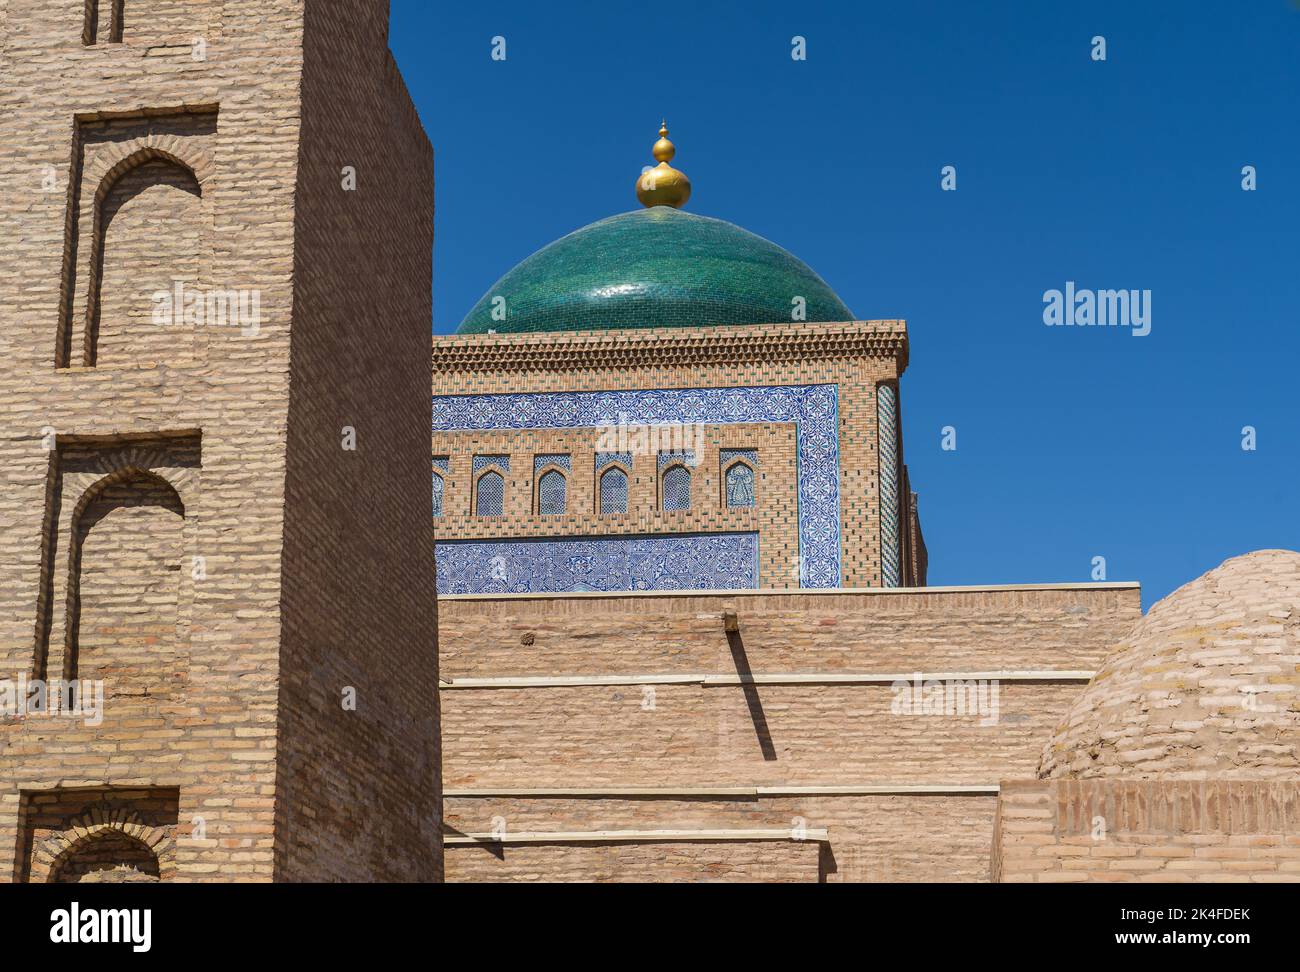 Green Dome Of The Pahlavan Mahmud Mausoleum in Khiva old town. Stock Photo